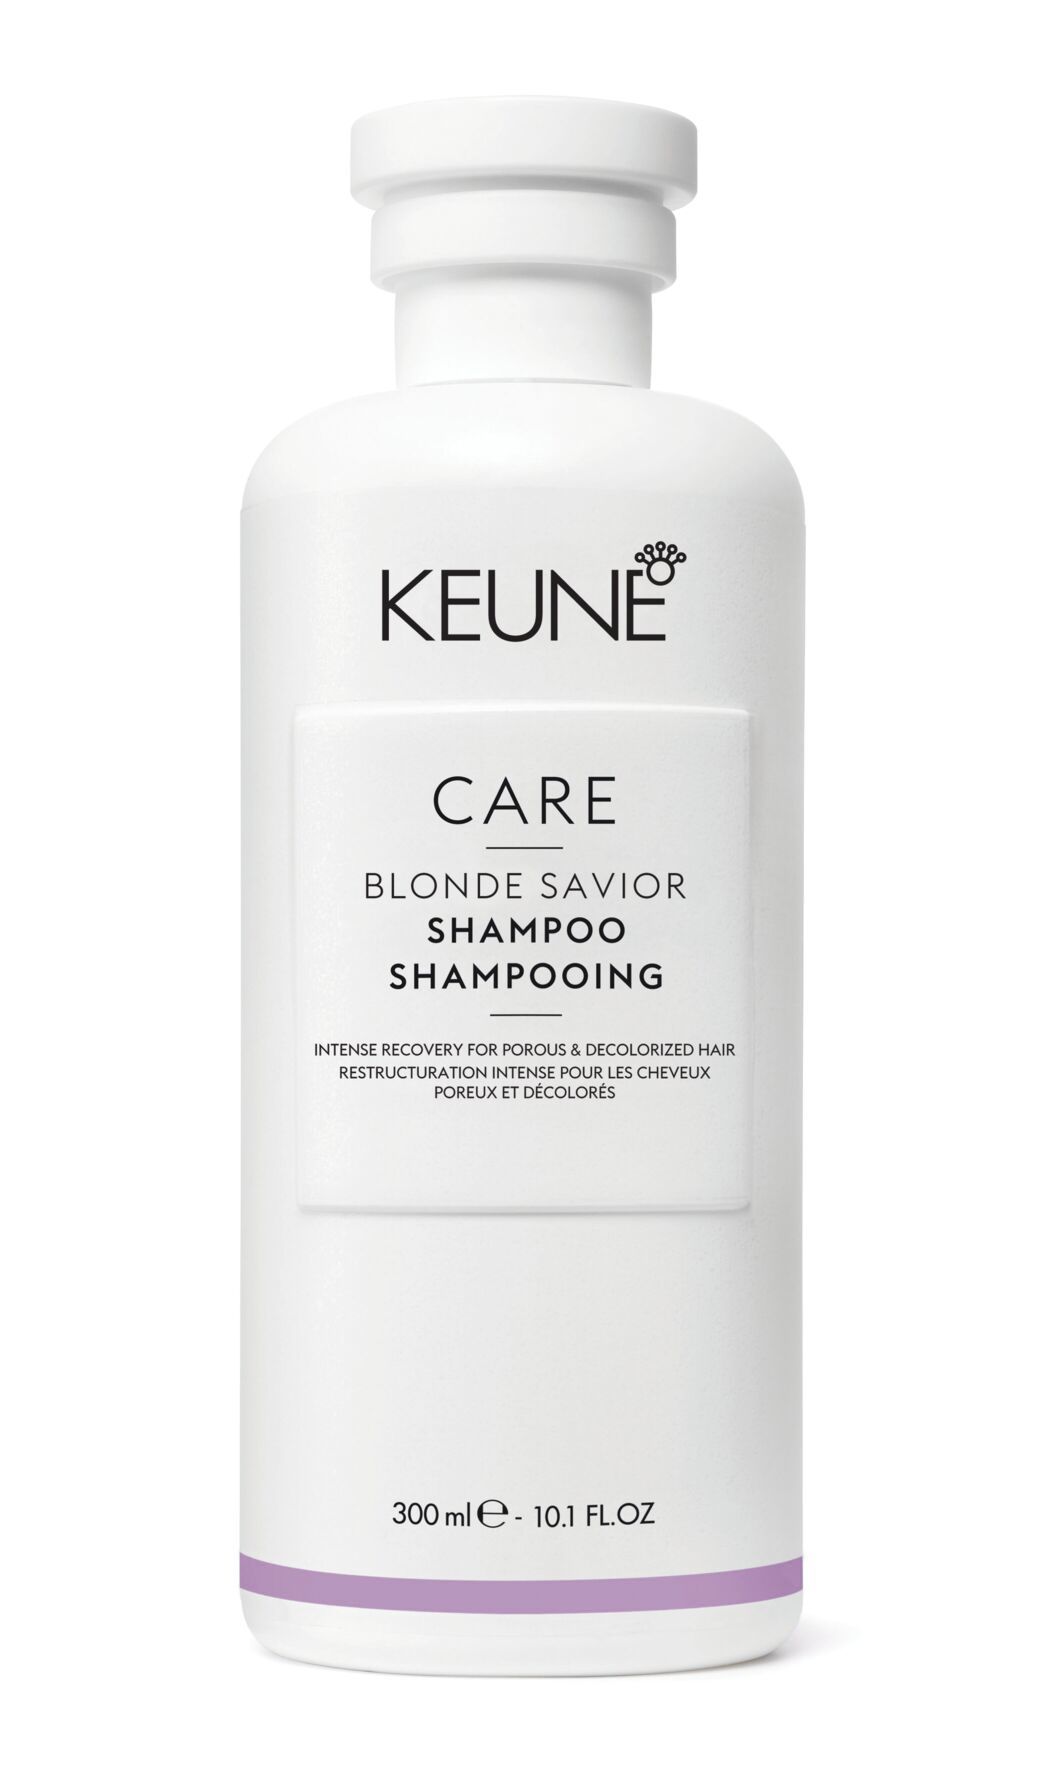 Repair and care for your blonde hair with Care Blonde Savior Shampoo. It strengthens, moisturizes, and minimizes hair breakage. Learn more about it now on keune.ch!